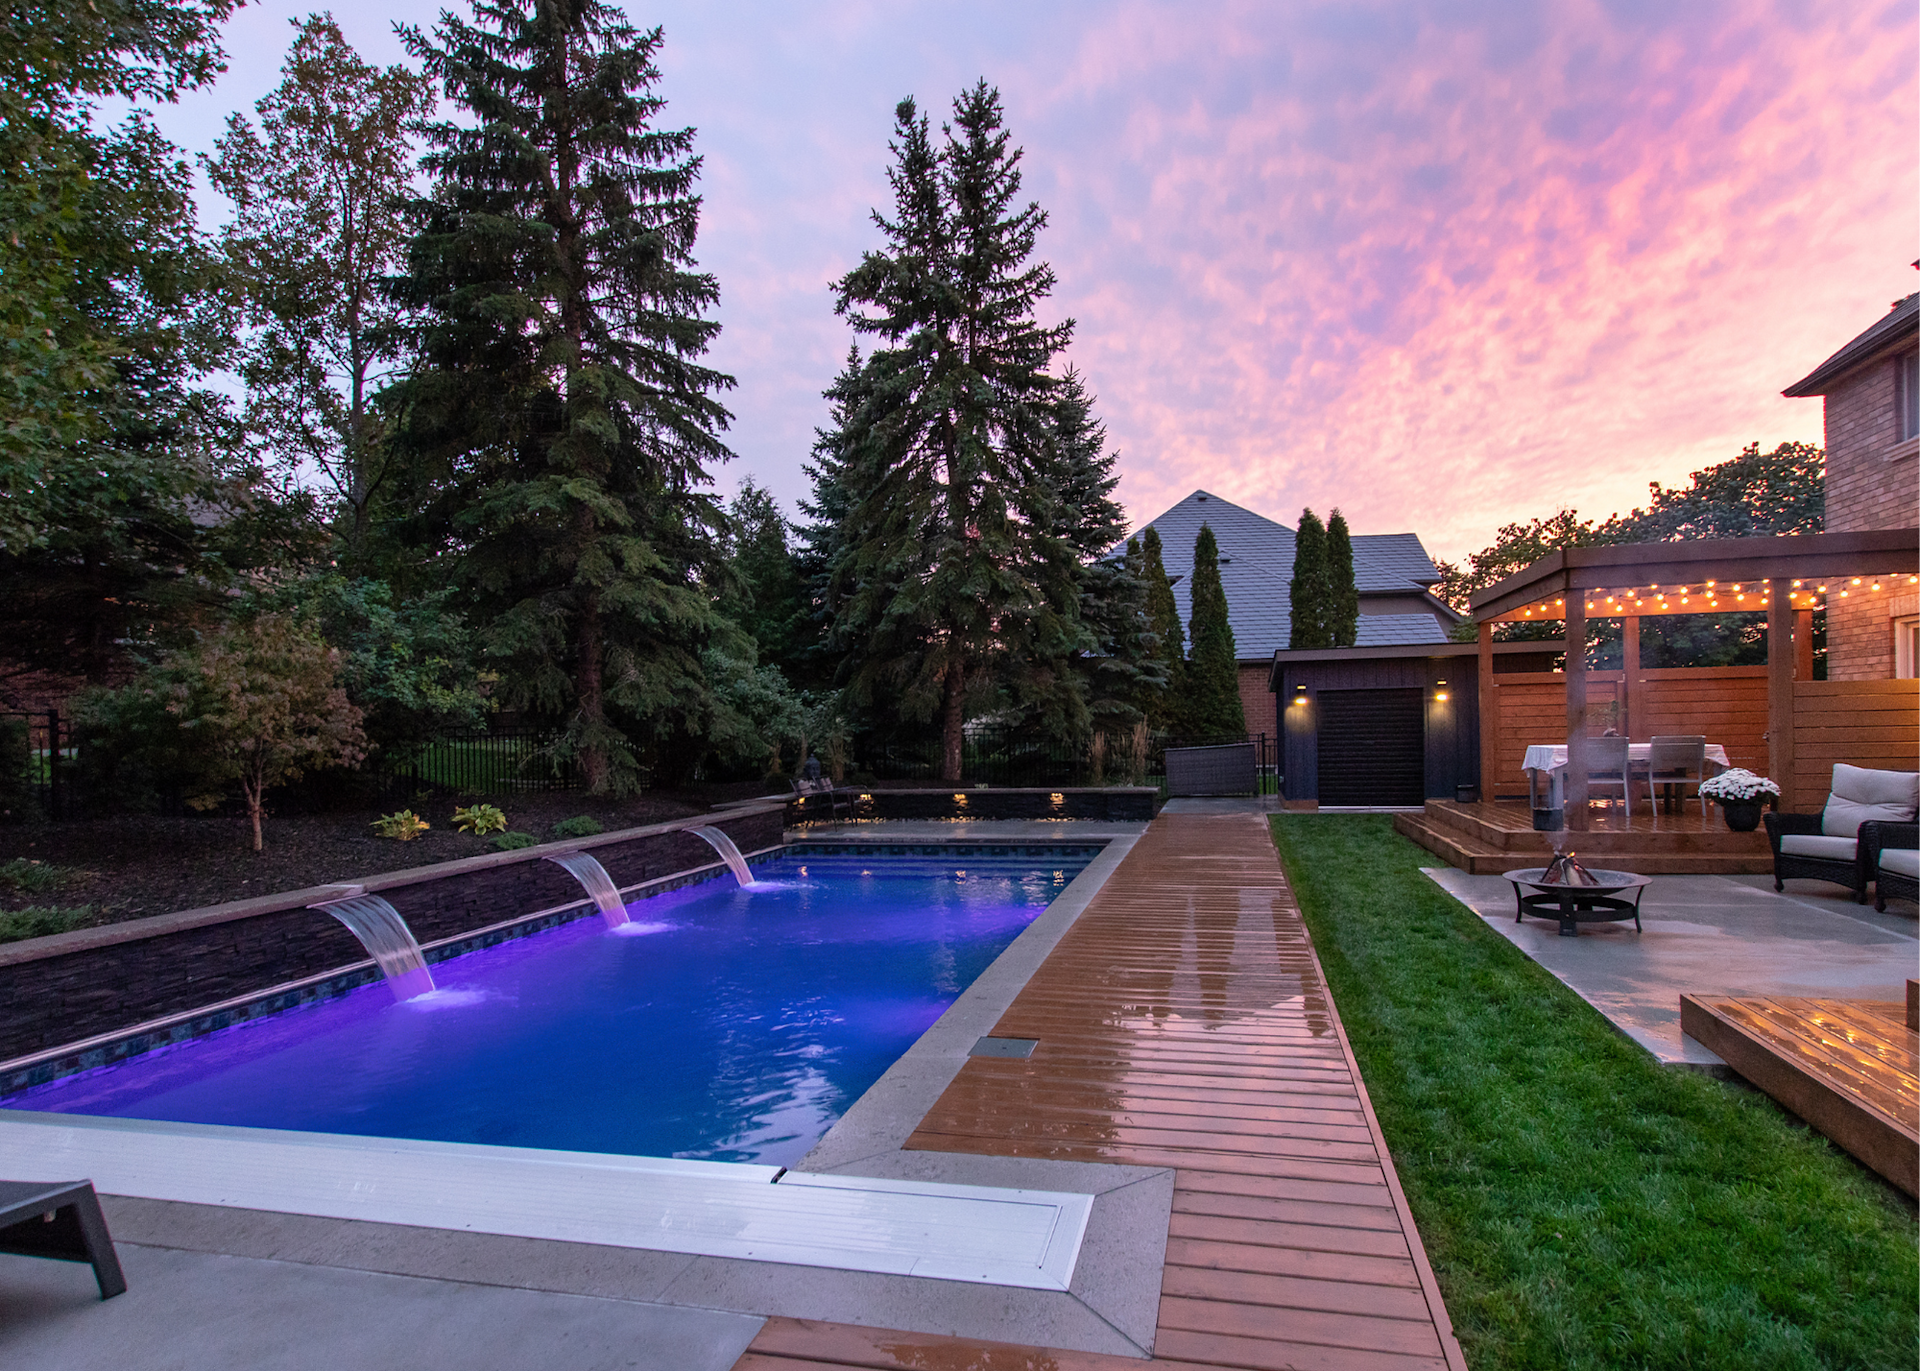 Pool with patio and lights